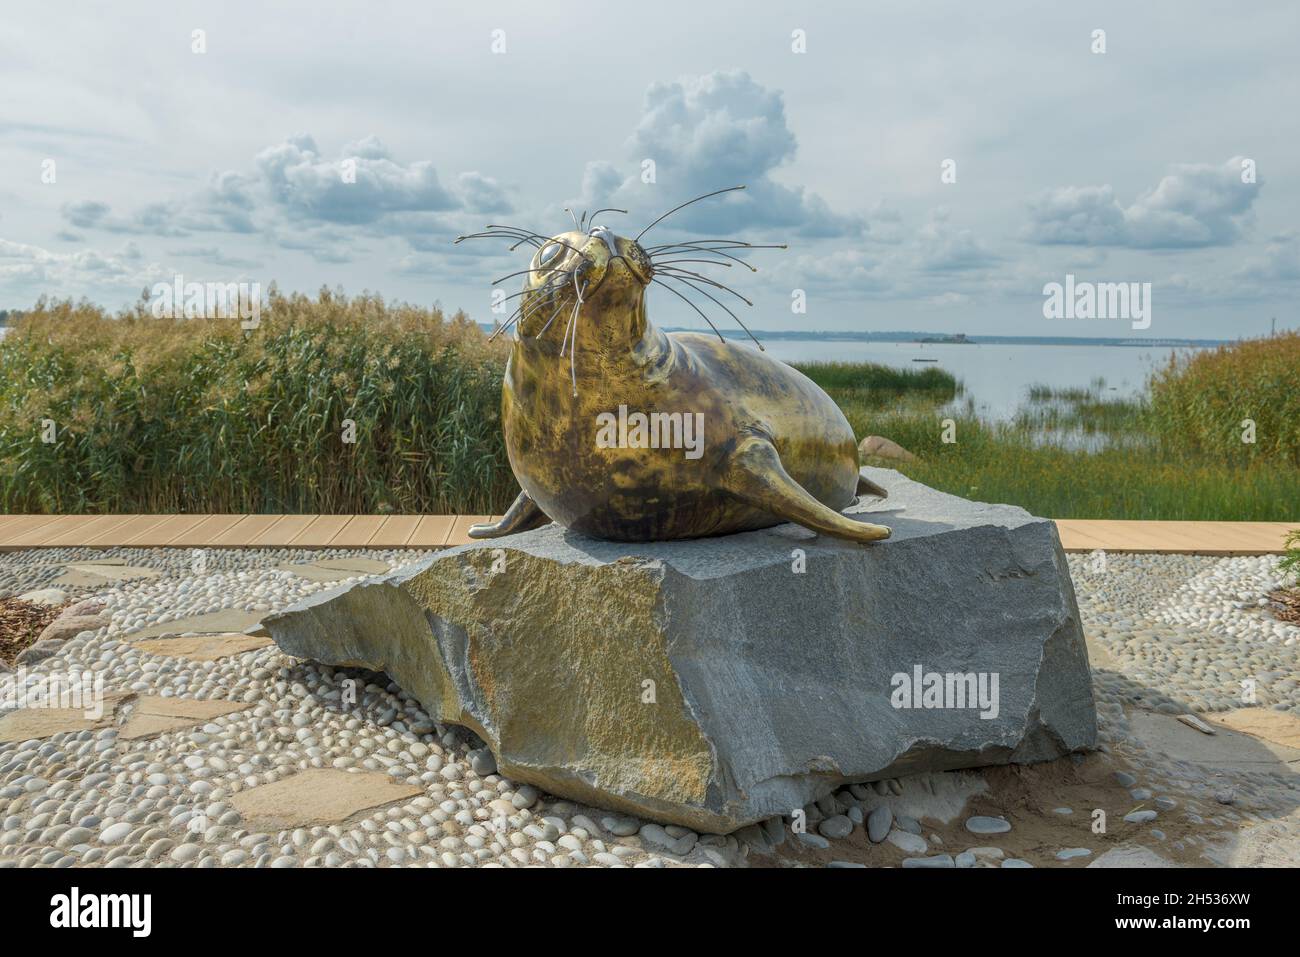 KRONSTADT, RUSSIA - AUGUST 11, 2021: Sculpture of the Baltic seal on the shores of the Gulf of Finland on August afternoon. Island of Forts Park Stock Photo